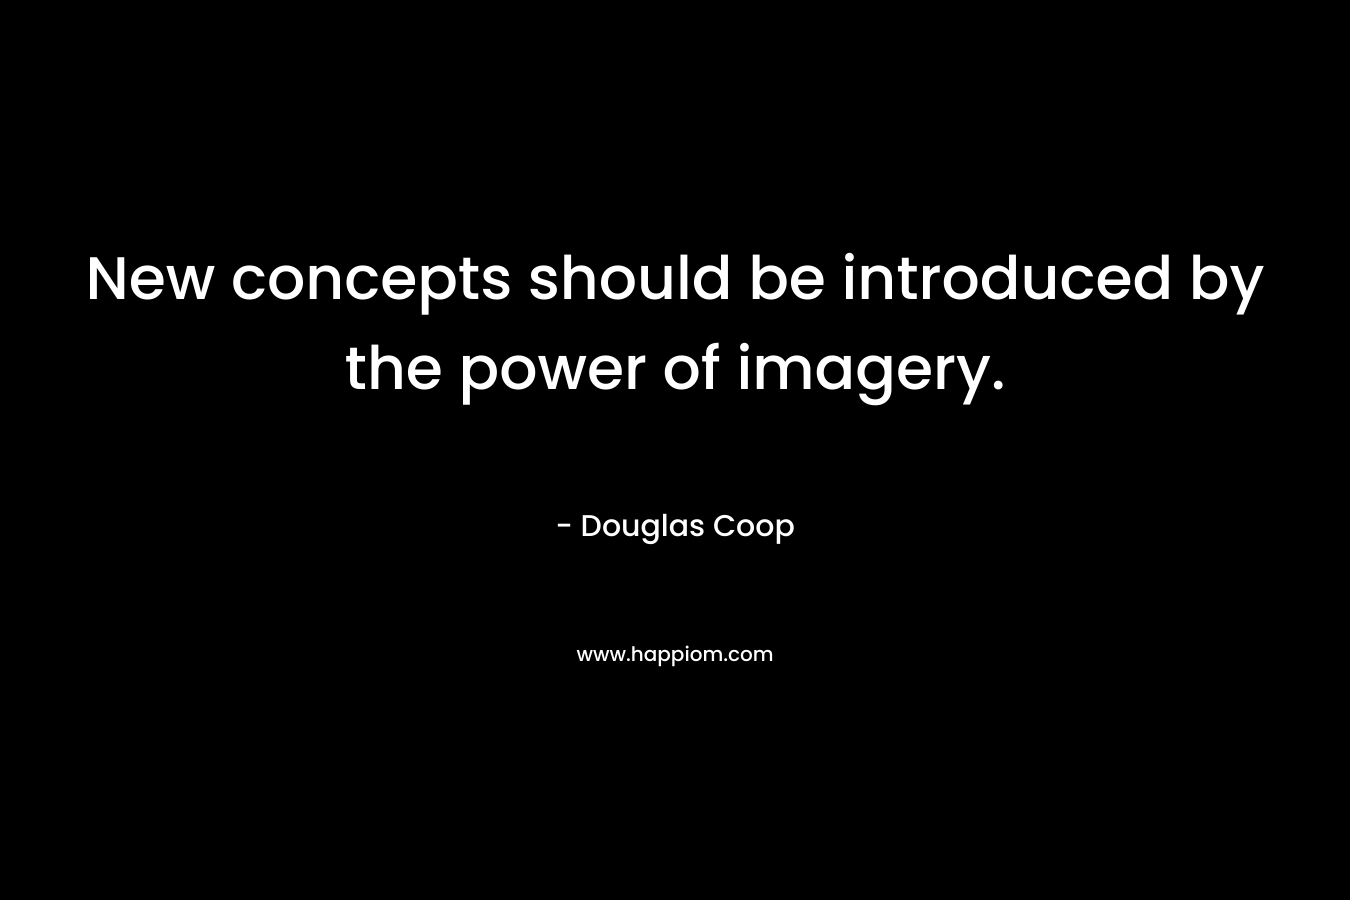 New concepts should be introduced by the power of imagery. – Douglas Coop